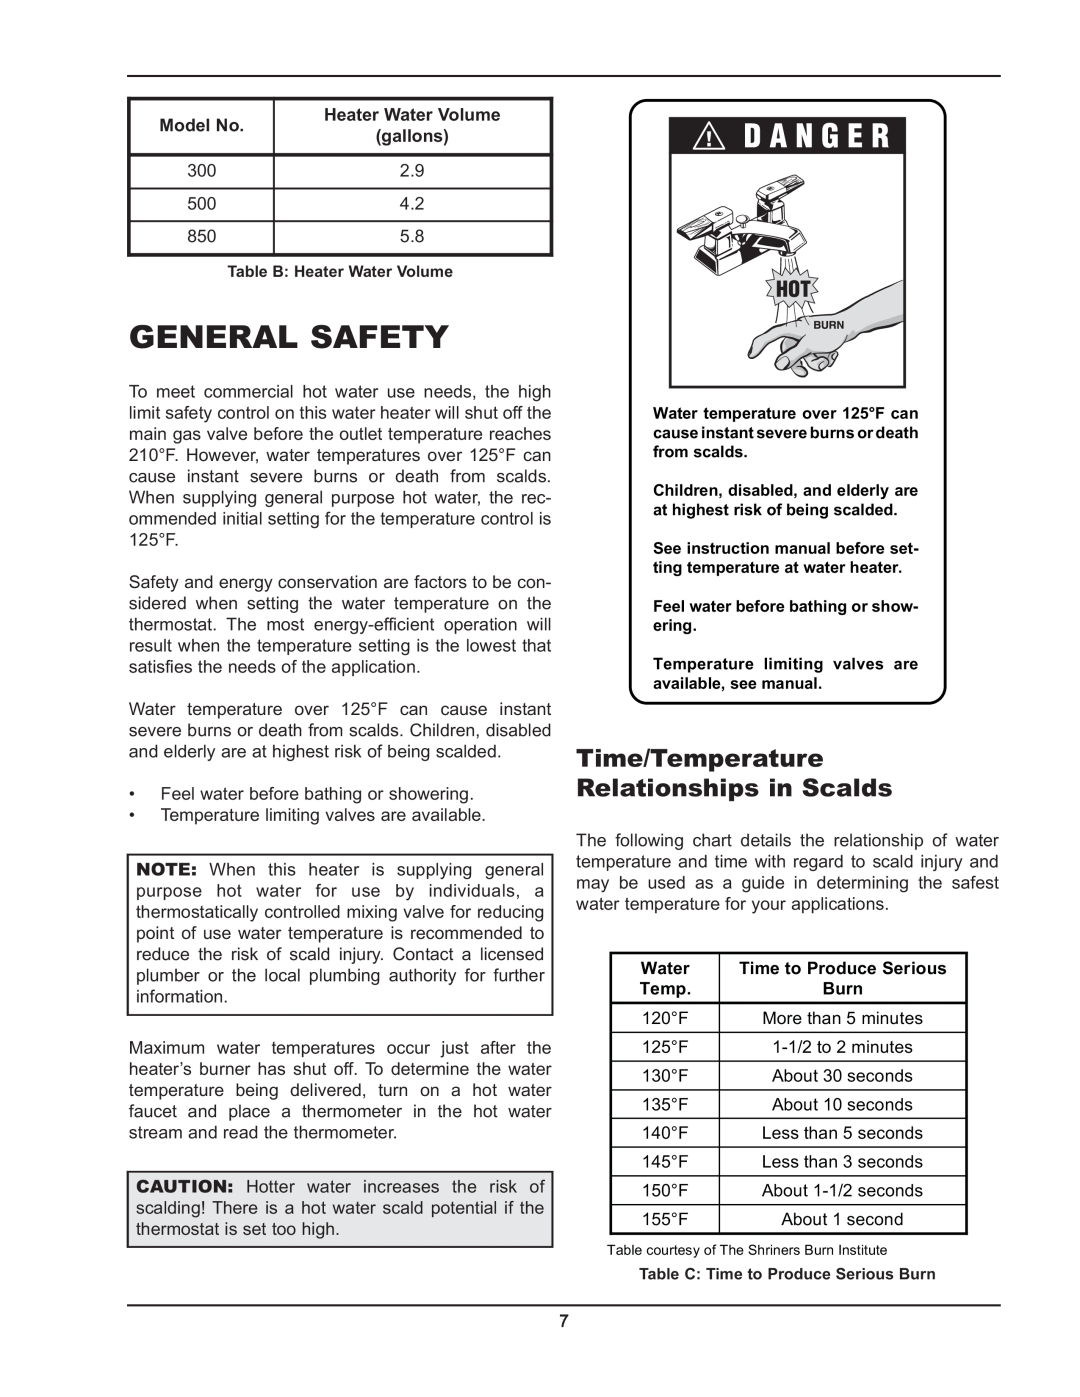 Raypak 300, 850 operating instructions General Safety, Time/Temperature Relationships in Scalds 